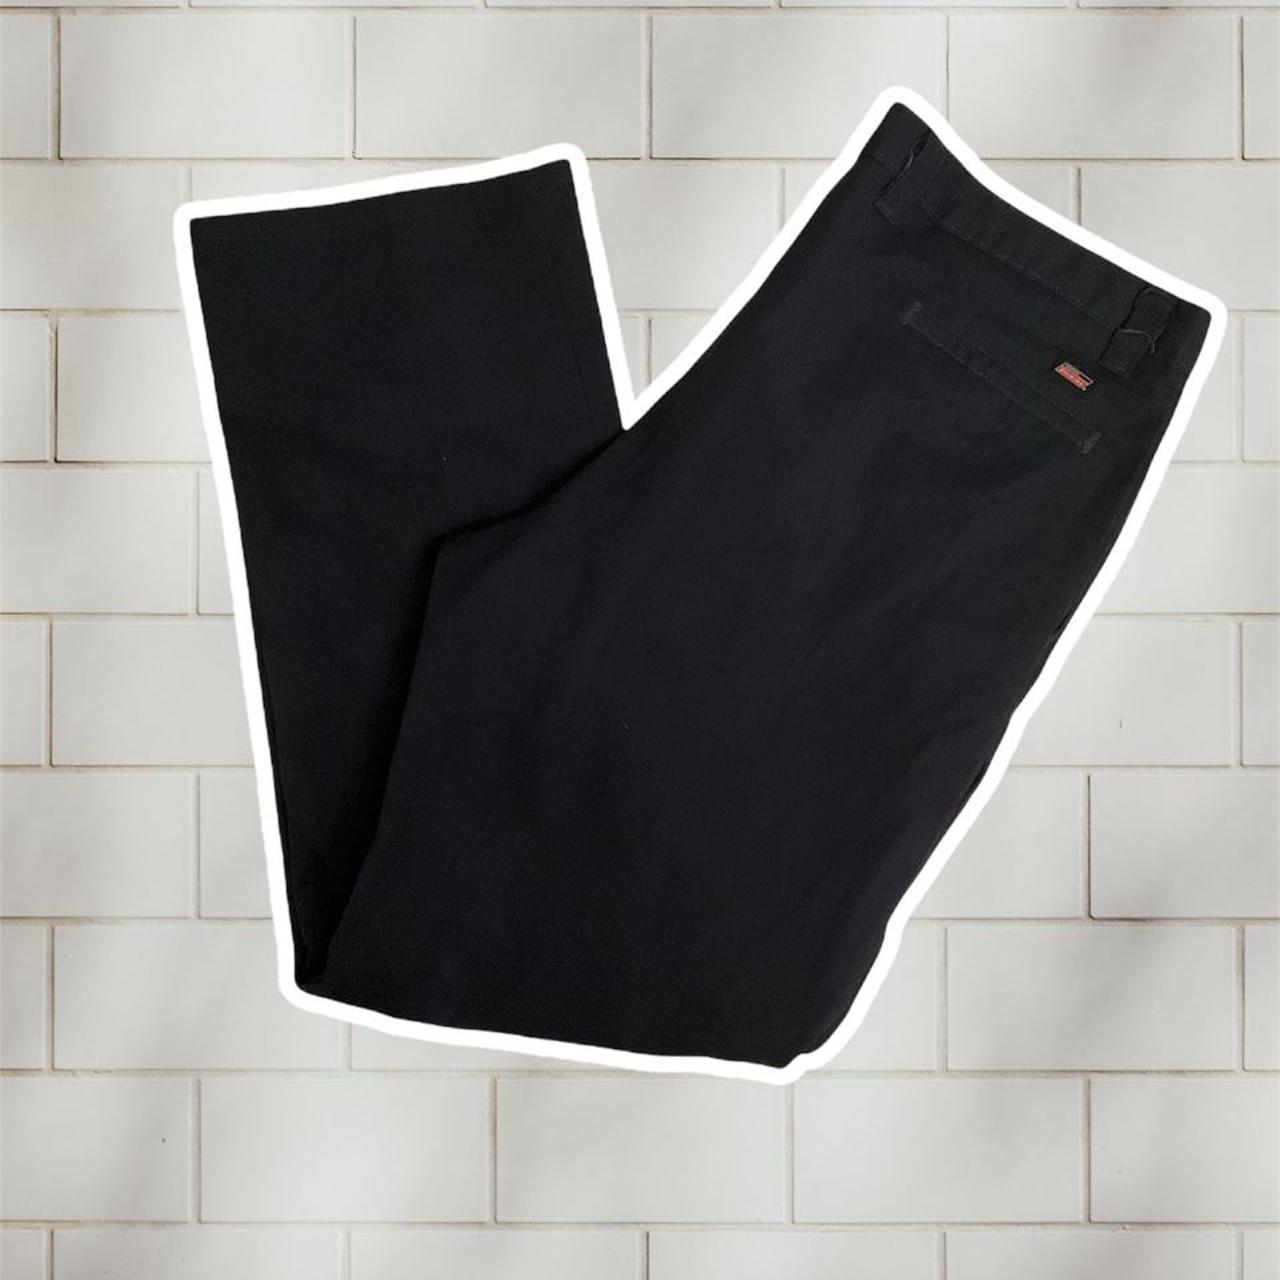 Product Image 1 - Dickies vintage workwear trousers.

Great condition,